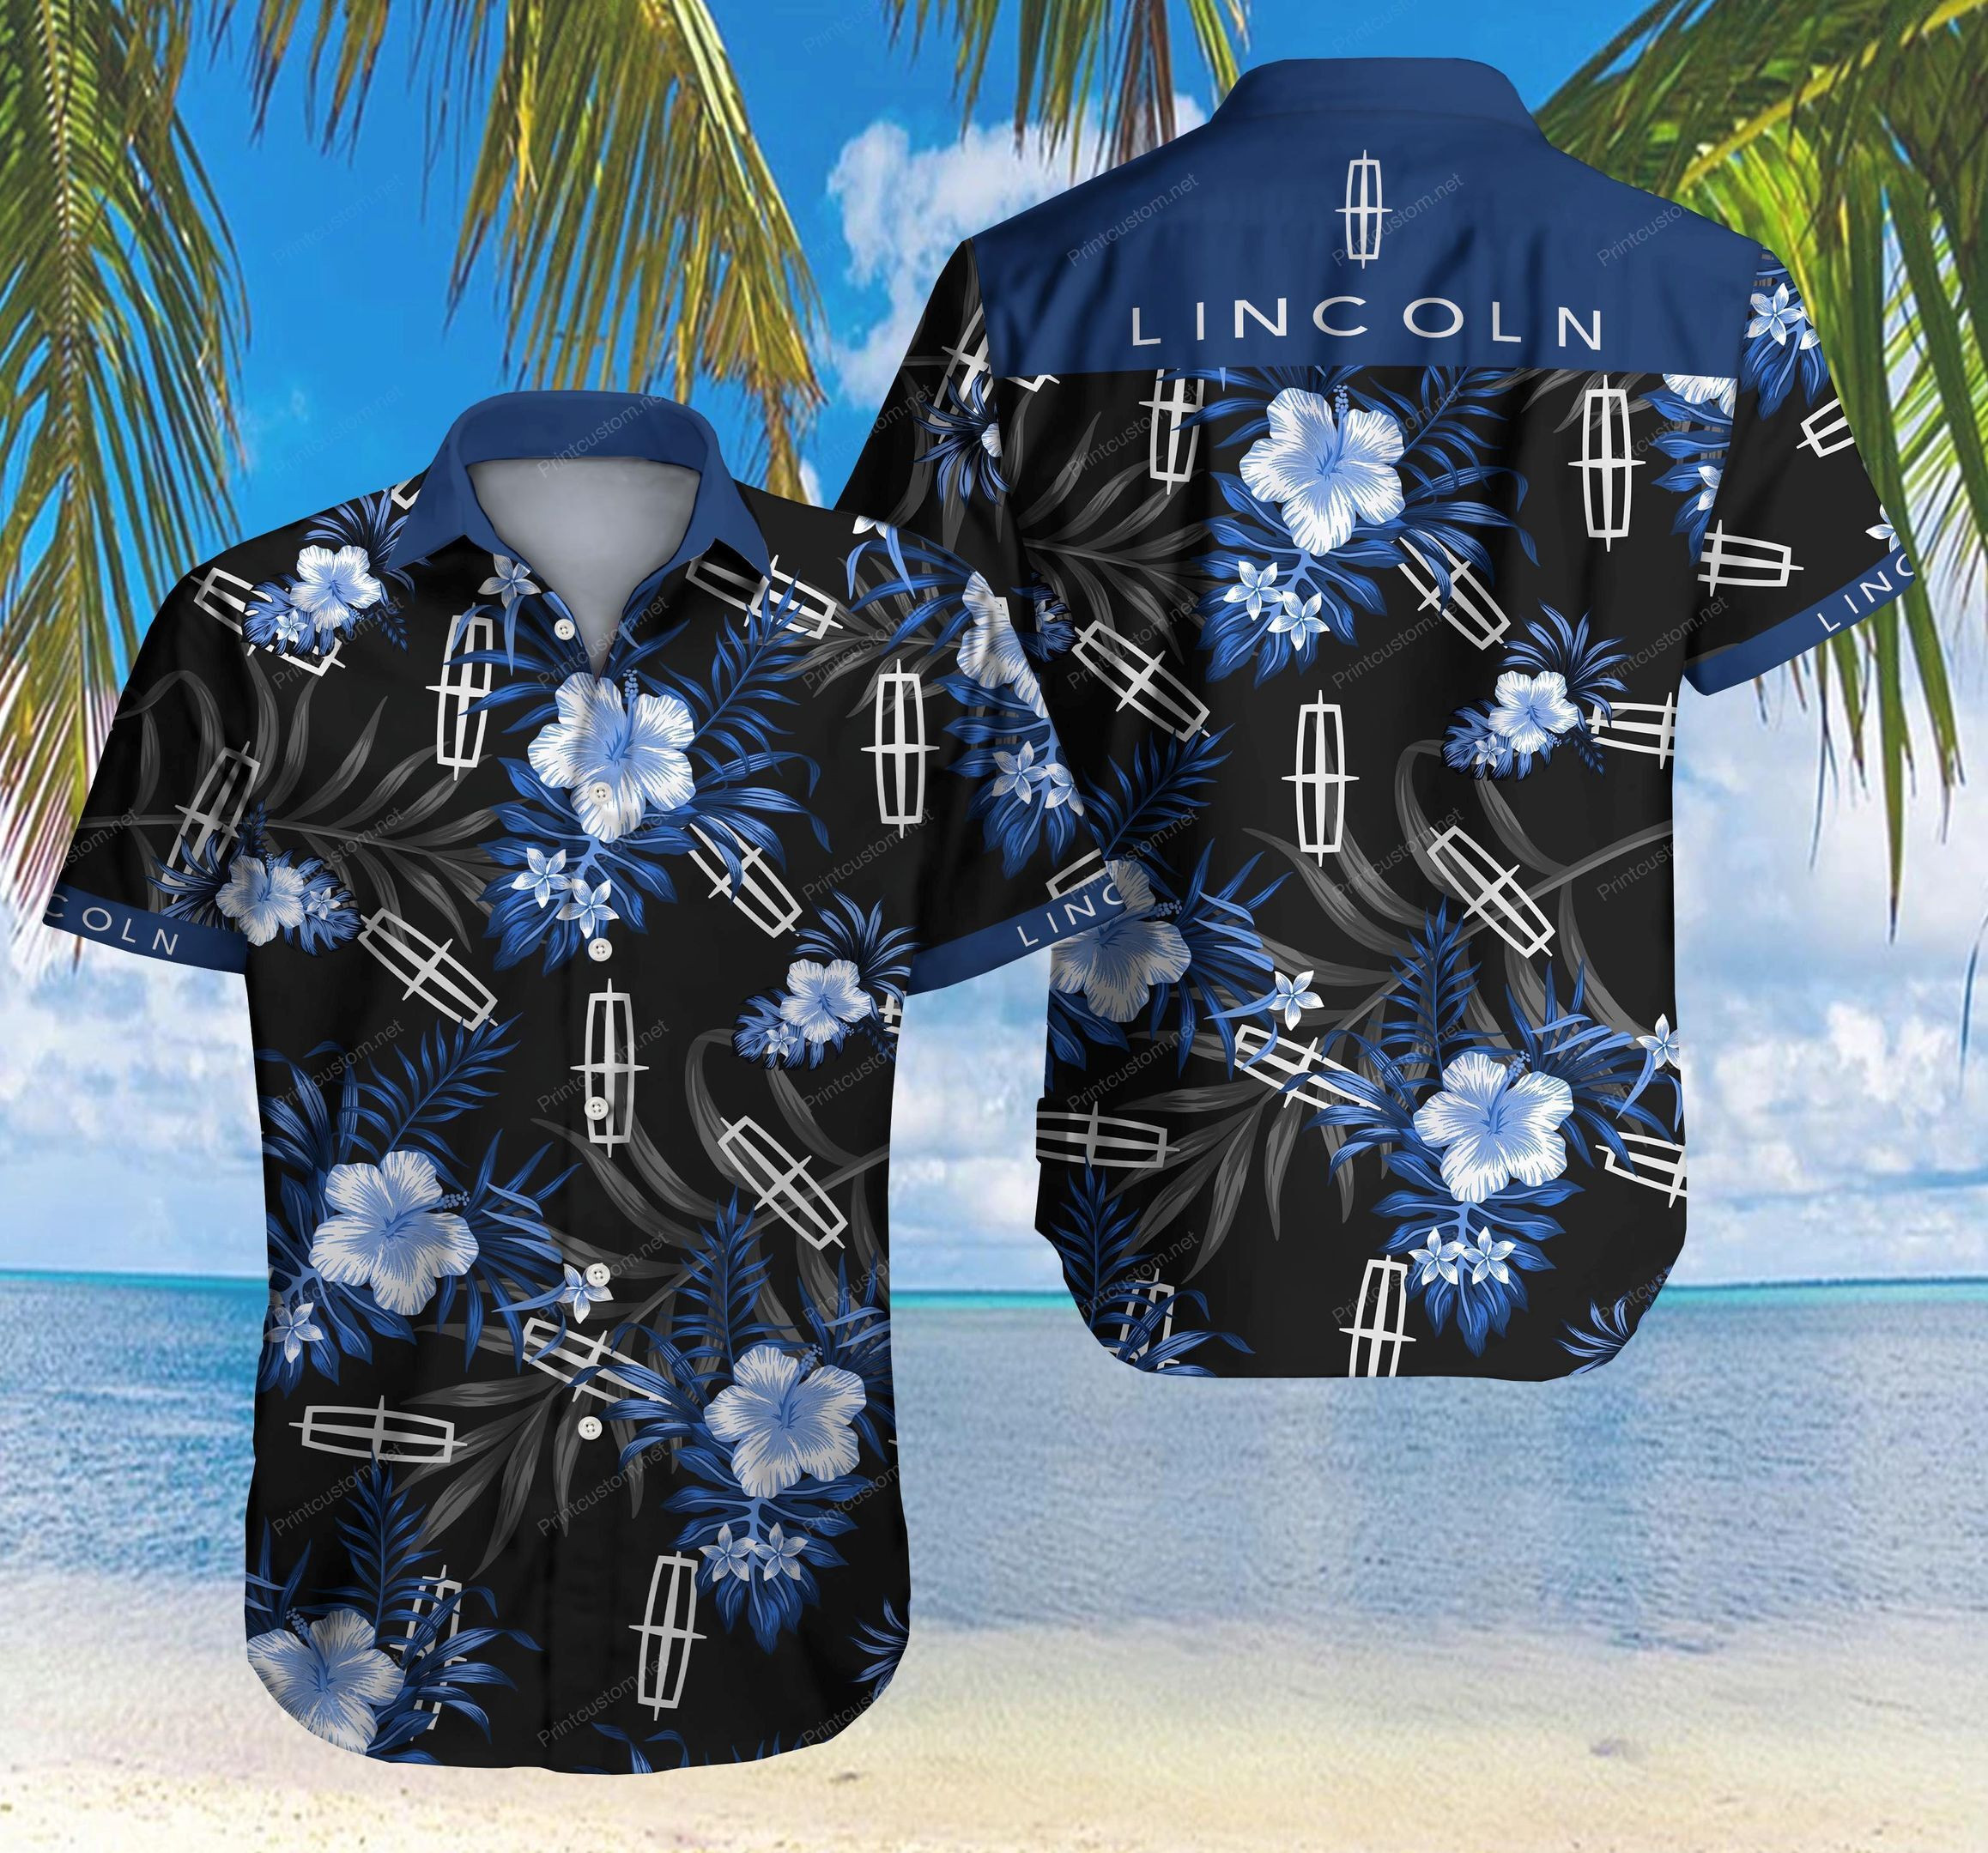 Discover many styles of Hawaiian shirts on the market in 2022 46